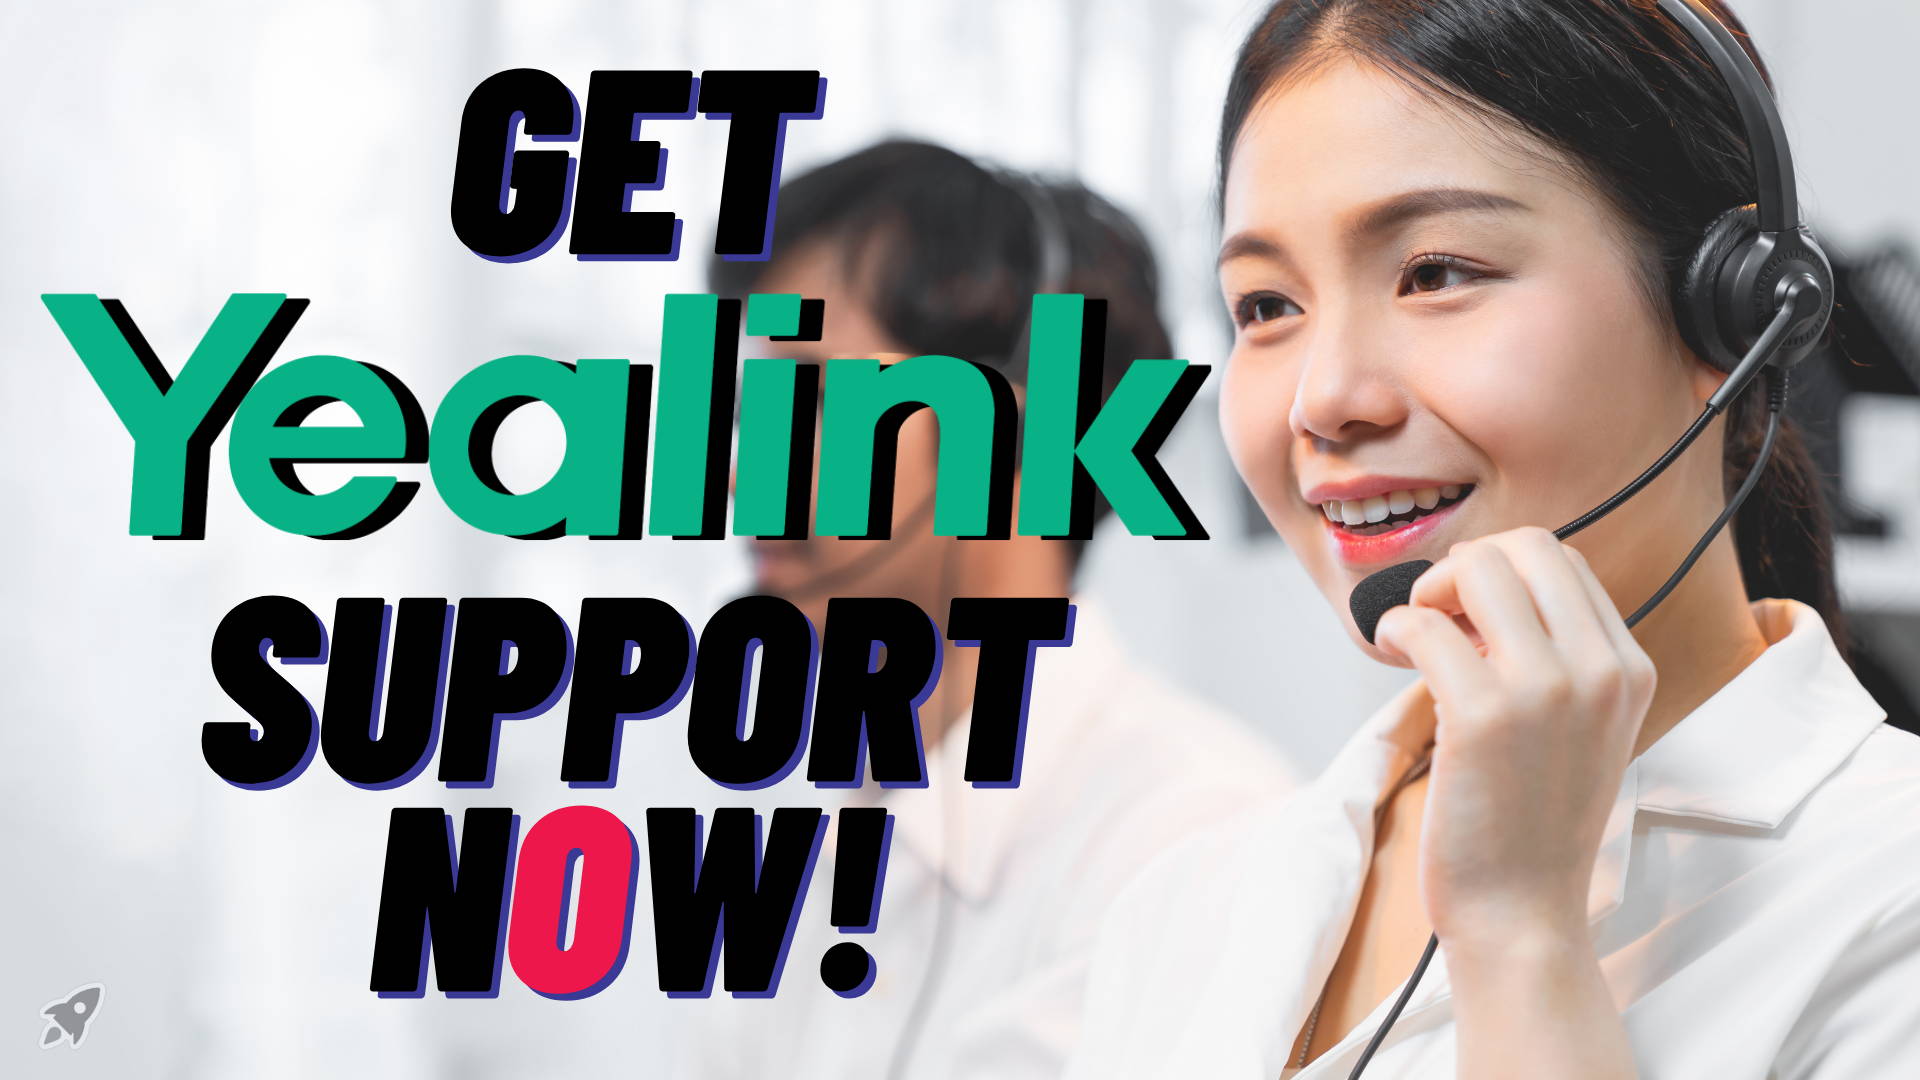 Efficient and Effective: How Yealink Support Can Streamline Your Business Operations